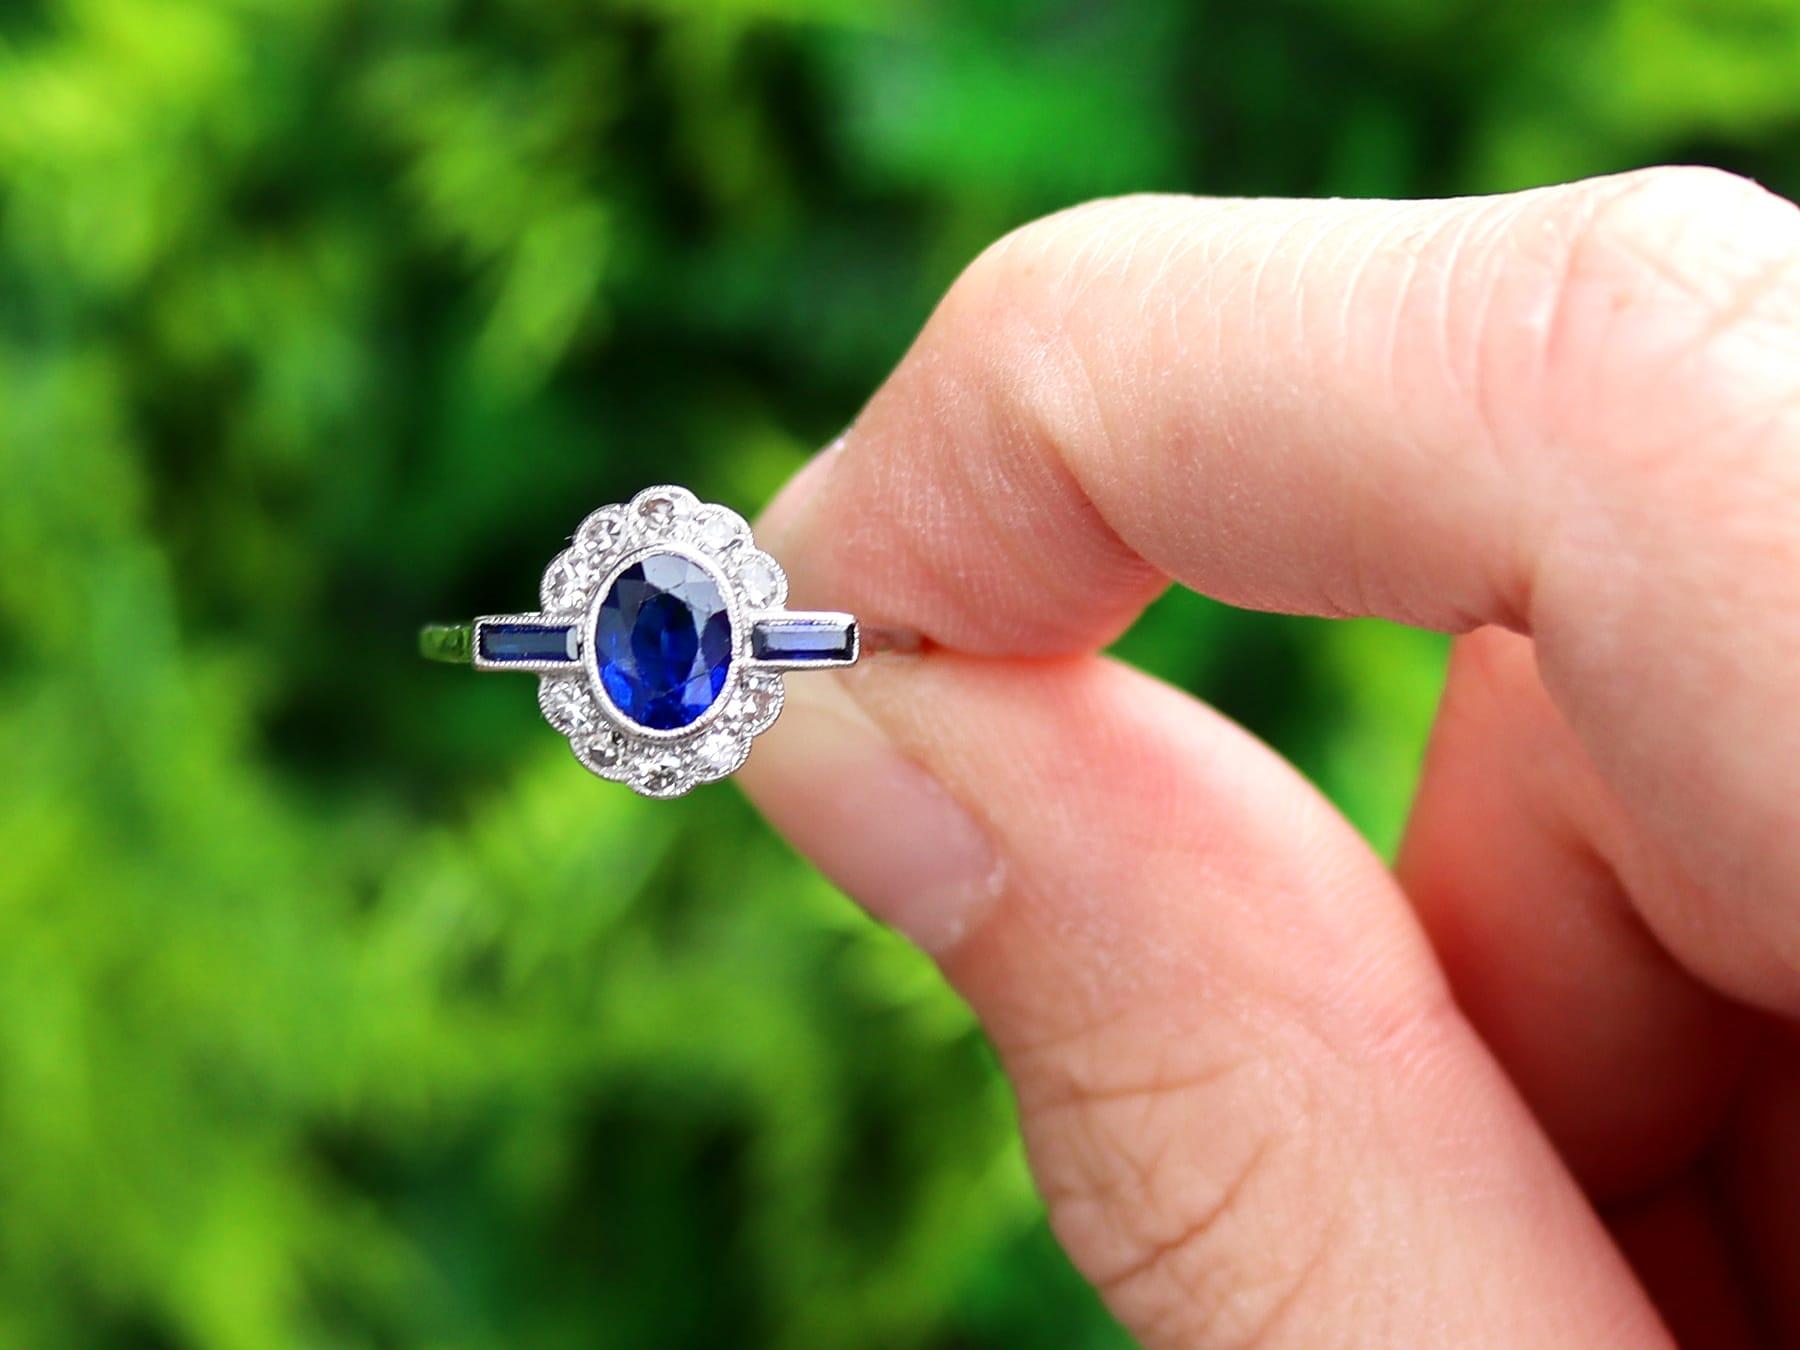 This fine and impressive antique sapphire and diamond ring has been crafted in 18k white gold with a platinum setting.

The pierced decorated setting is ornamented with a feature millegrain decorated collet set 1.20ct oval faceted cut blue